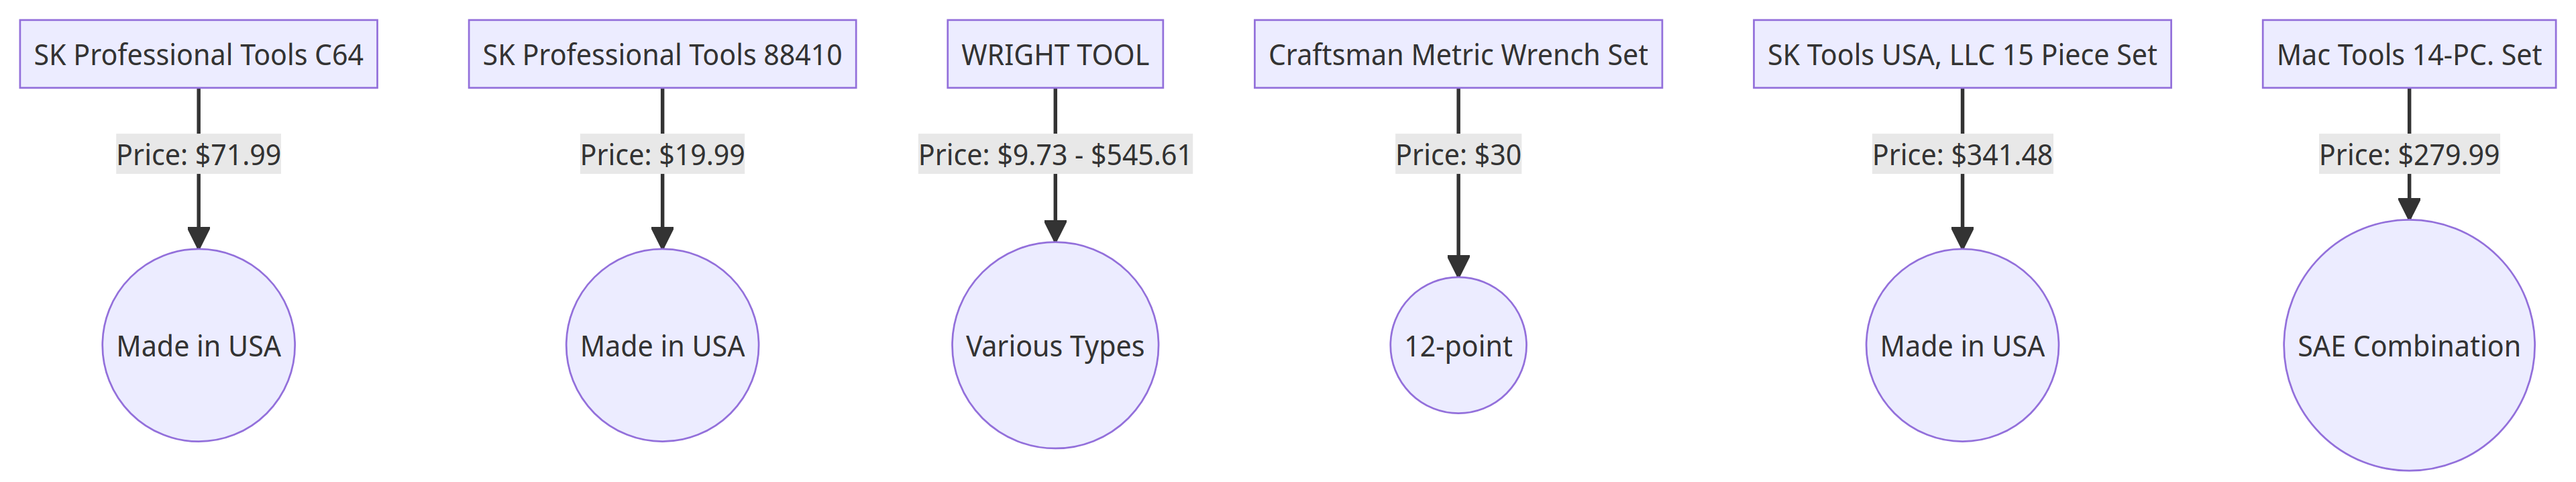 Flow Chart of 12-Point Wrench Prices